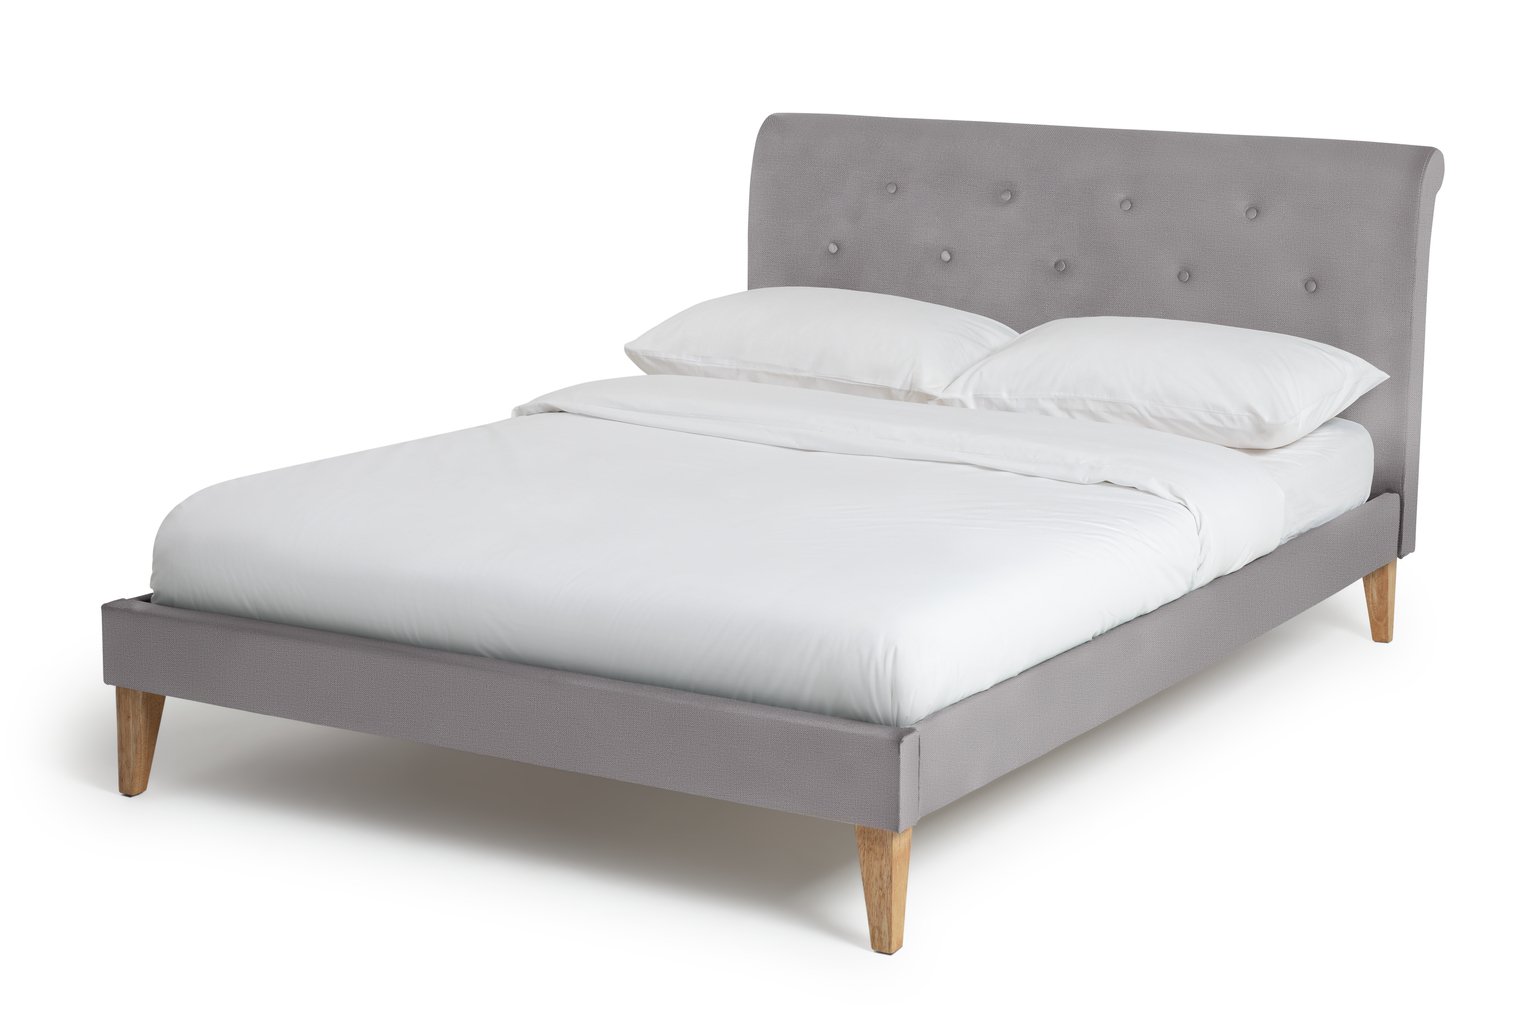 Habitat Anders Double Fabric Bed Frame - Grey